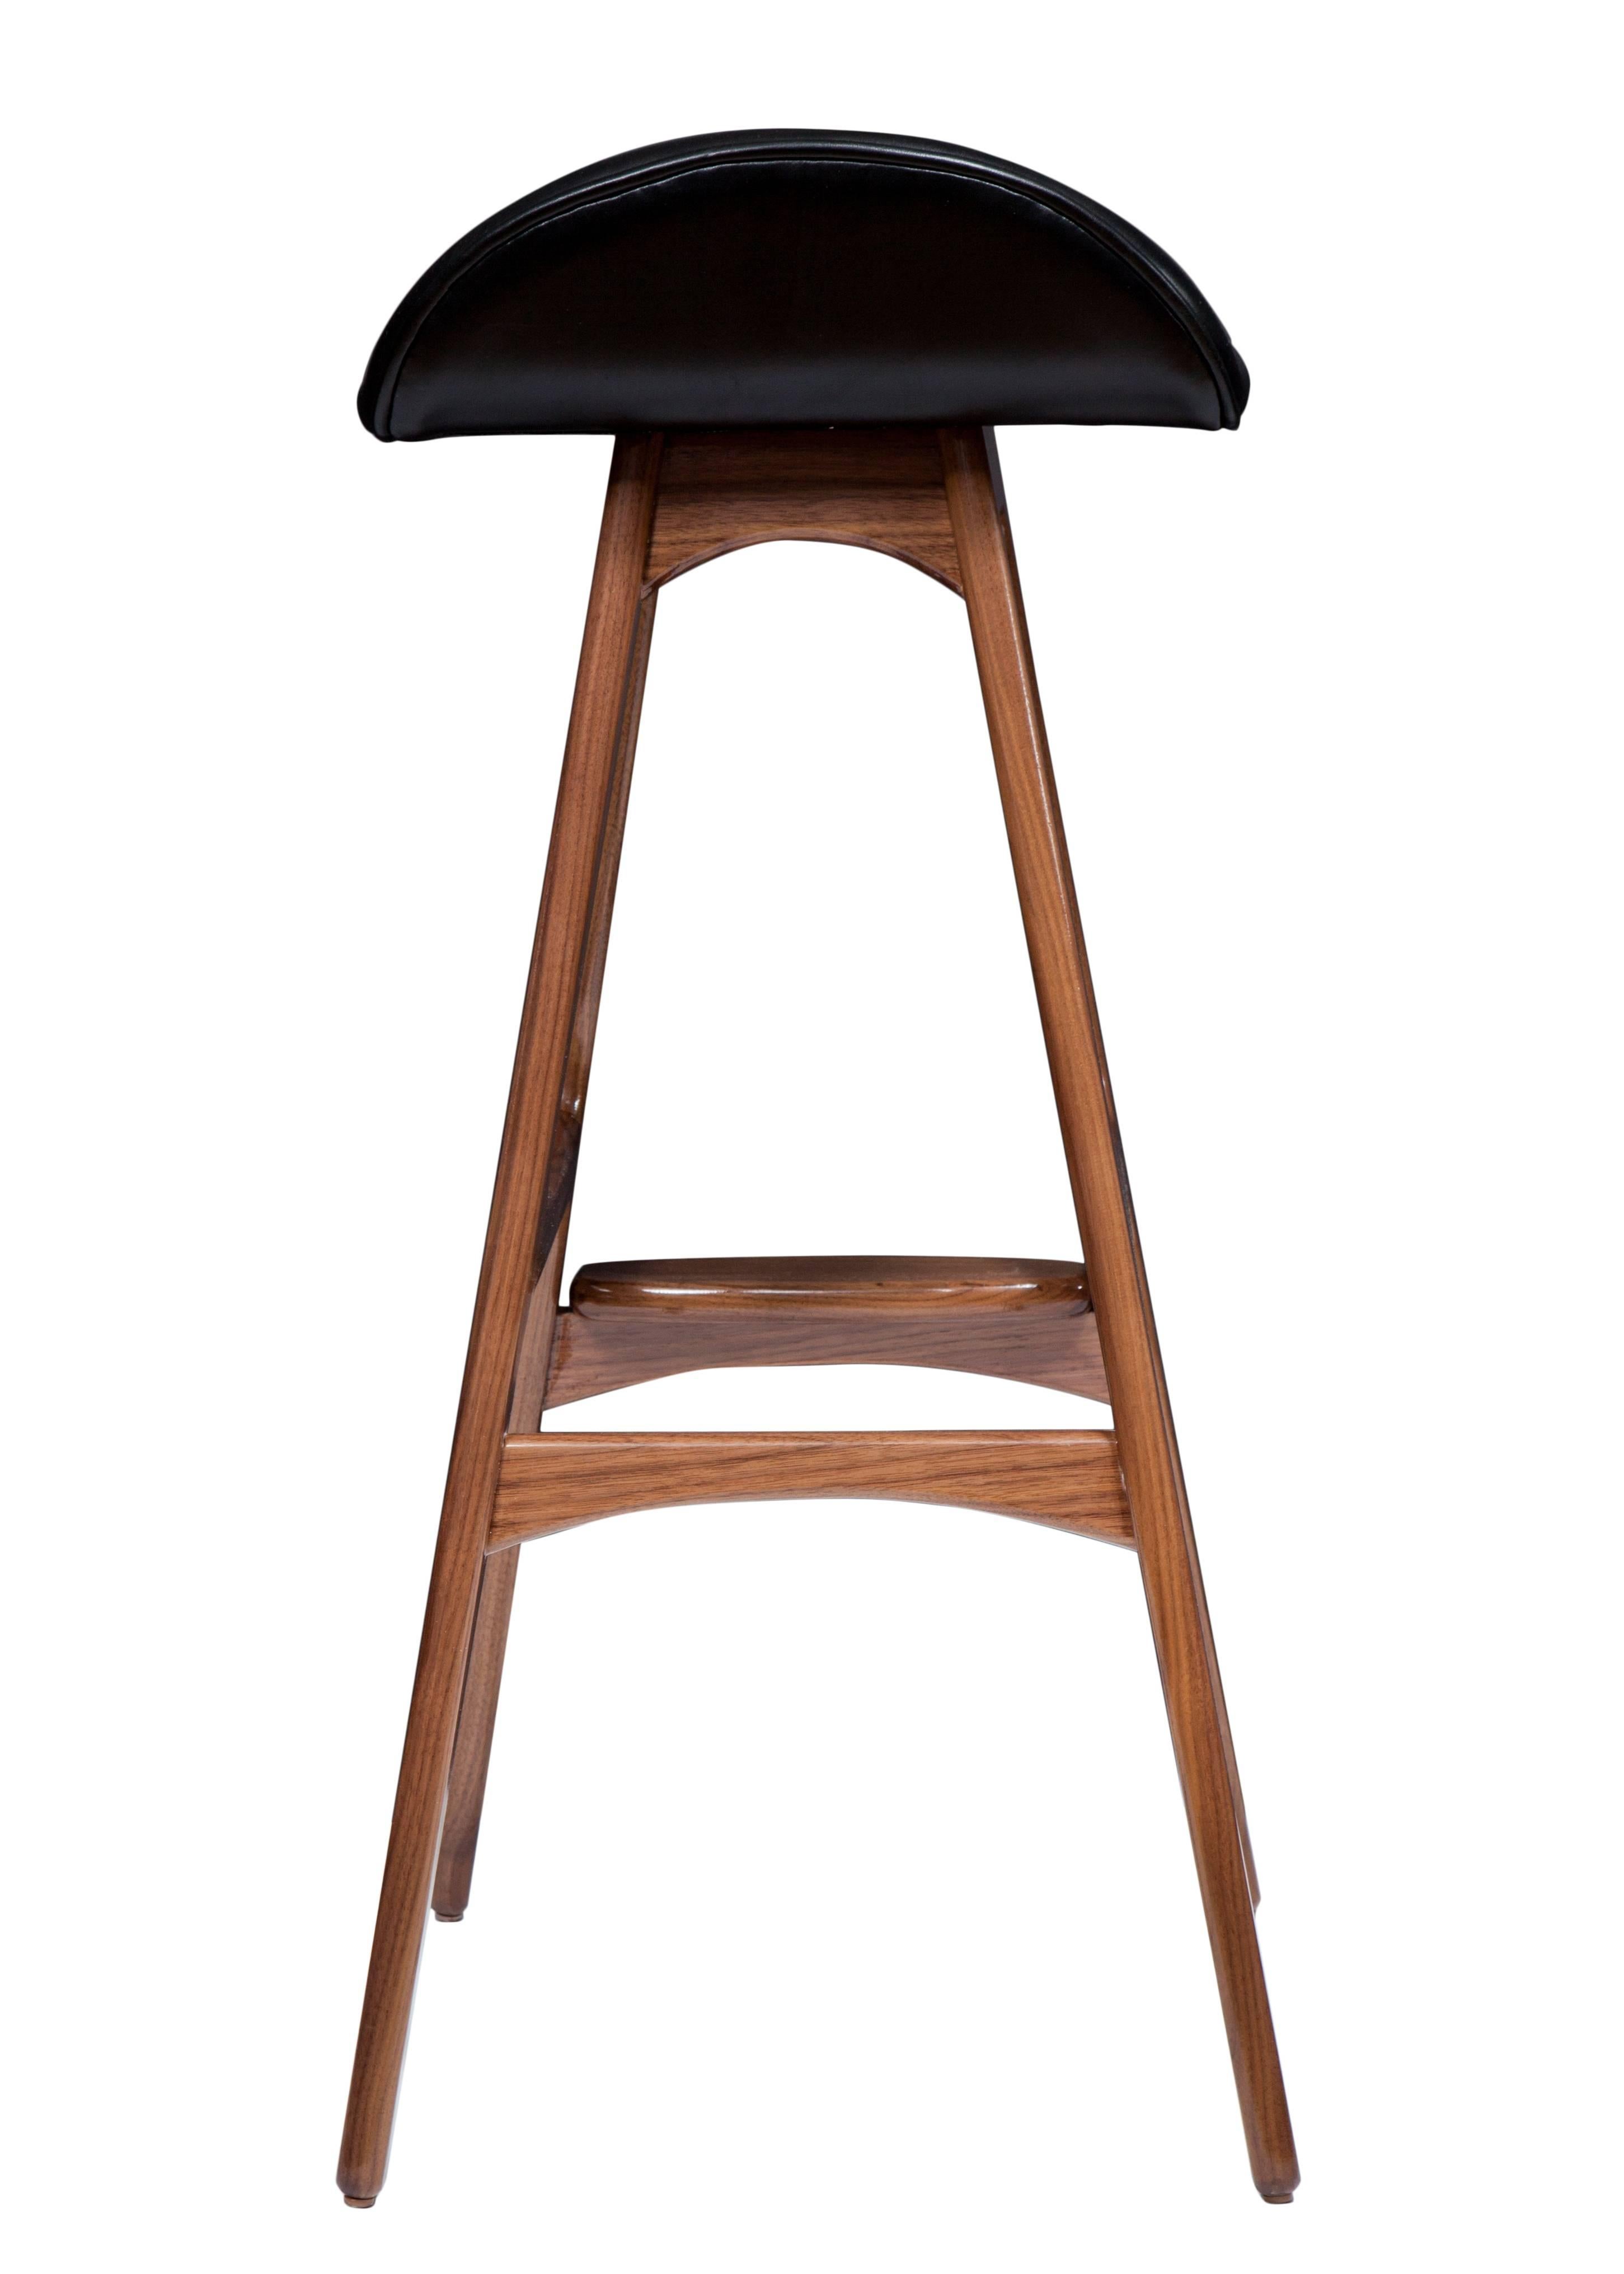 Boyd counter stool shown in solid walnut with black leather seat.